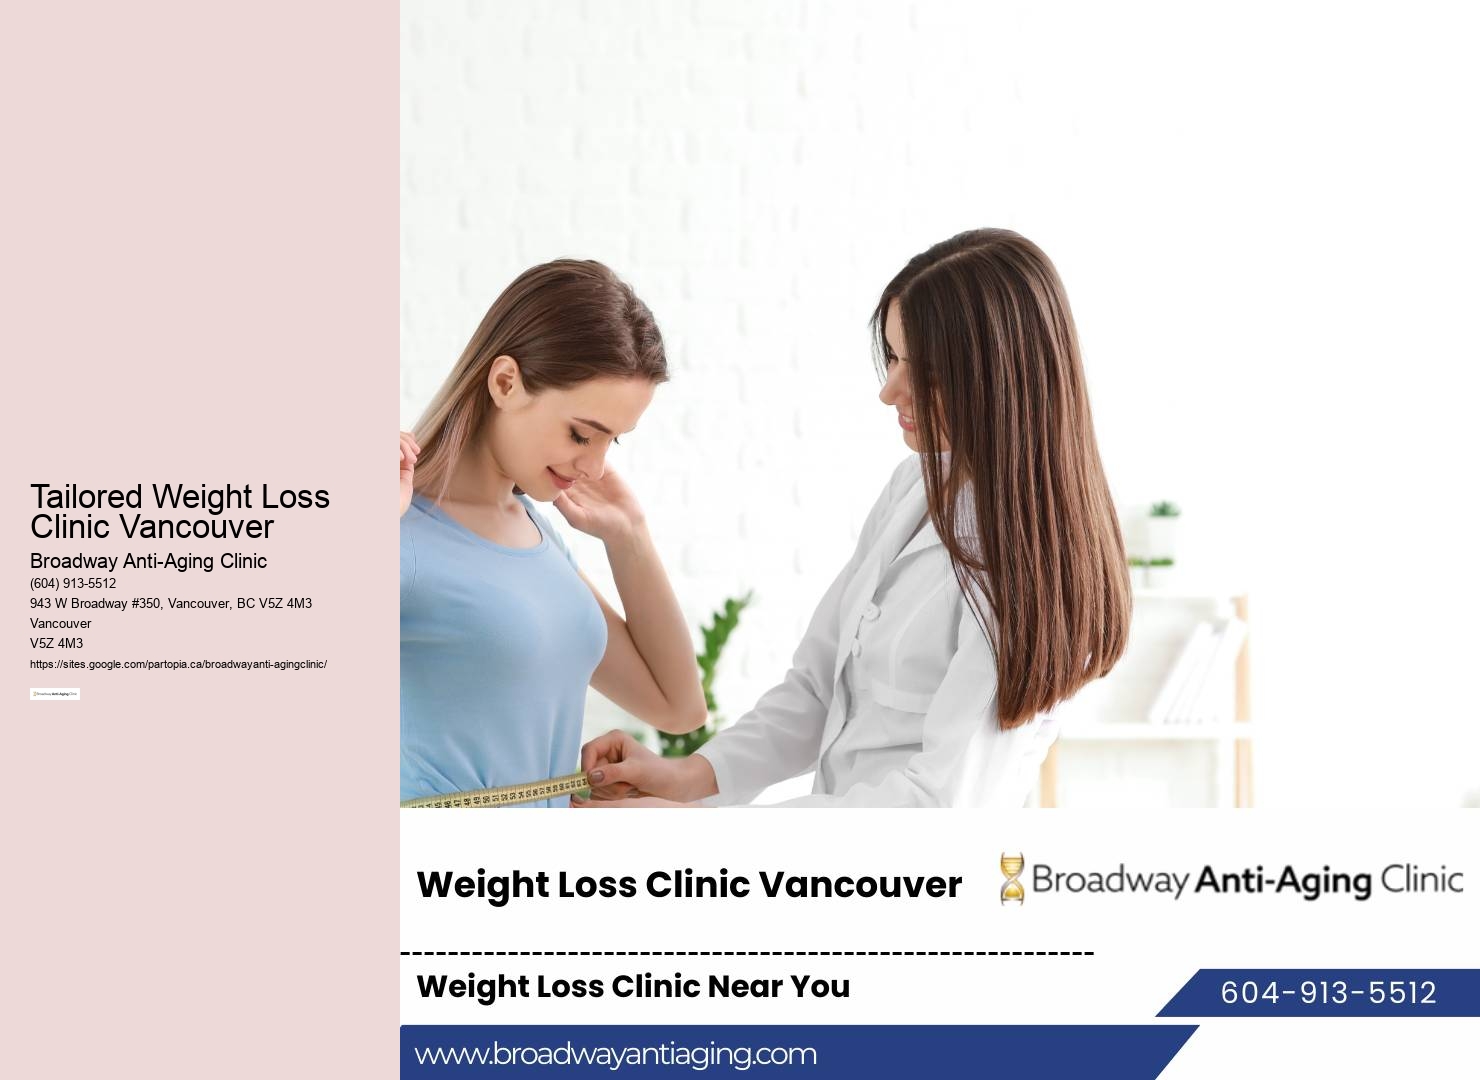 Tailored Weight Loss Clinic Vancouver